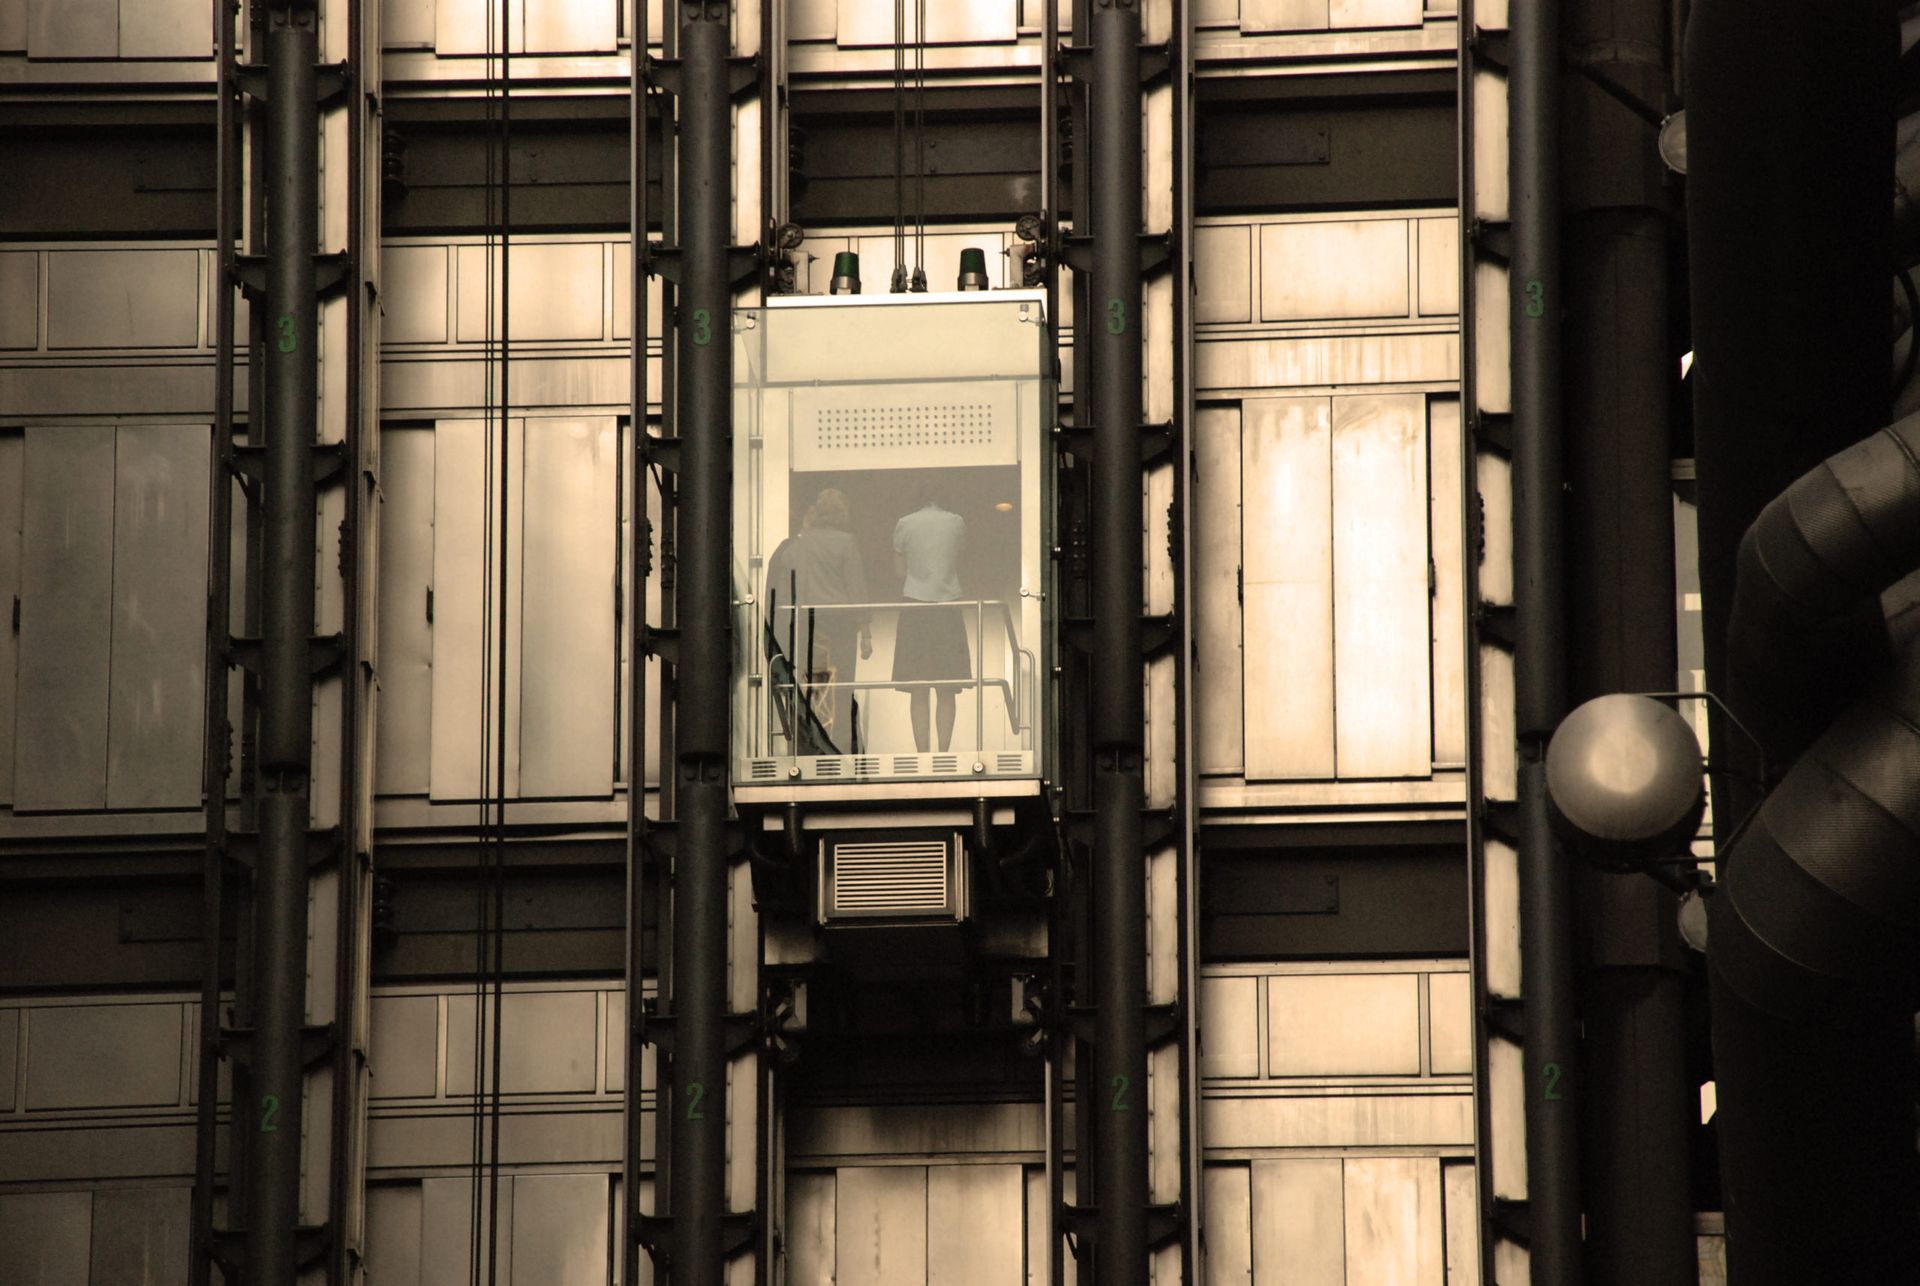 Lloyds of London elevator as seen from the exterior (photo dpvisions / iStock / Getty Images)